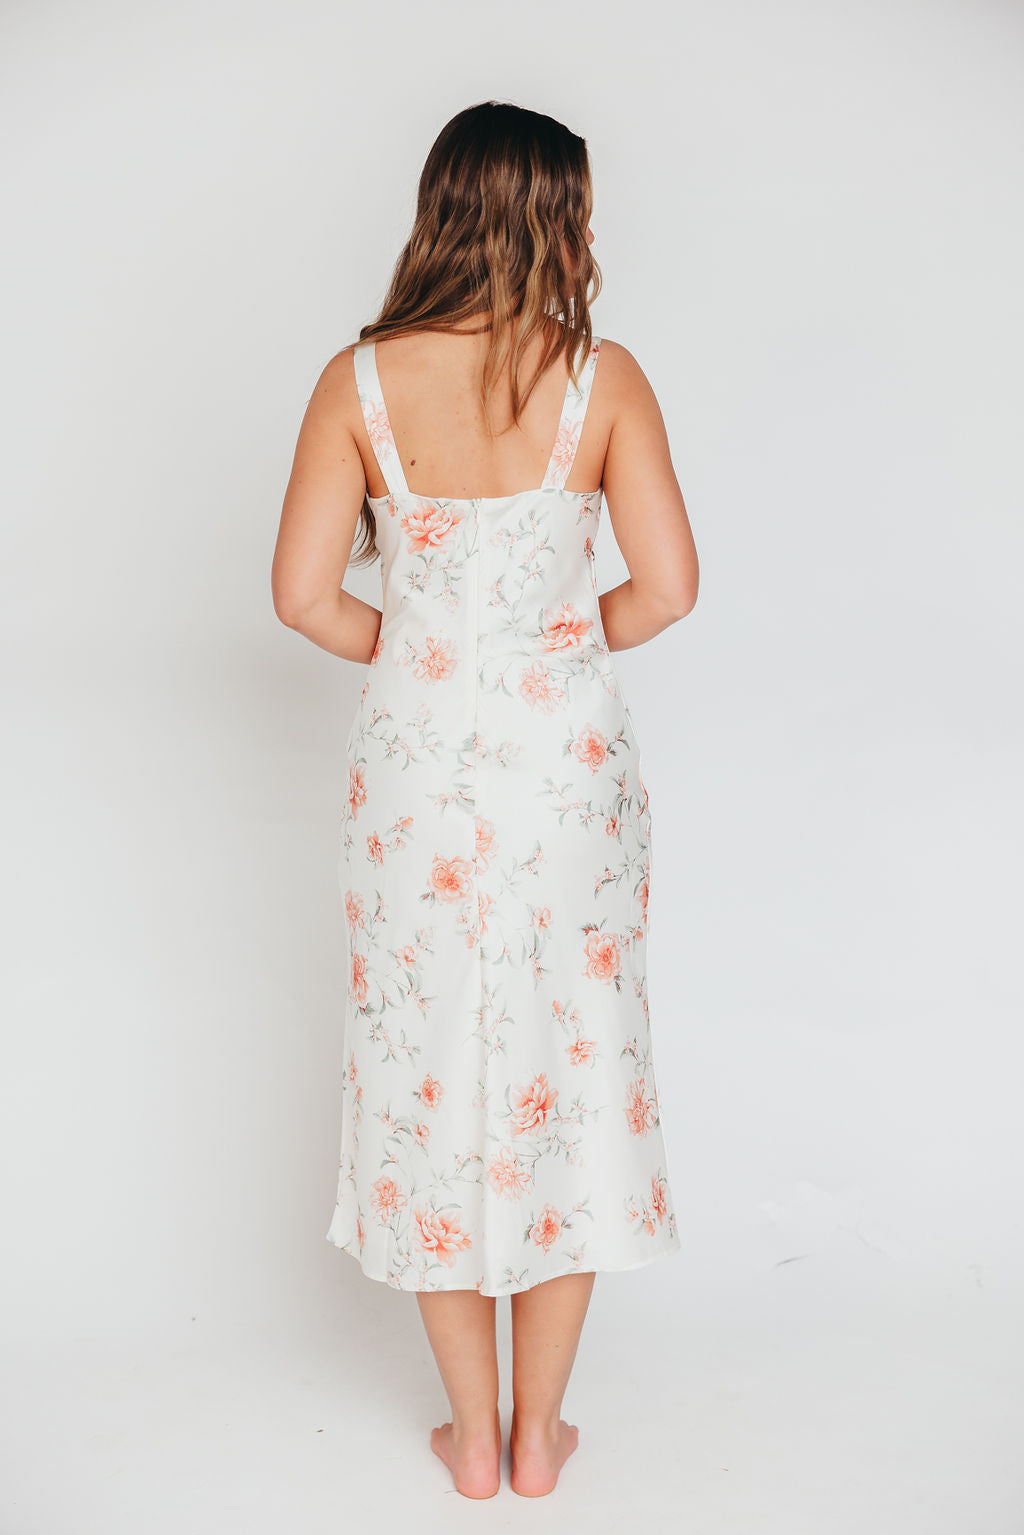 The Felicity Midi Dress in Ivory Floral